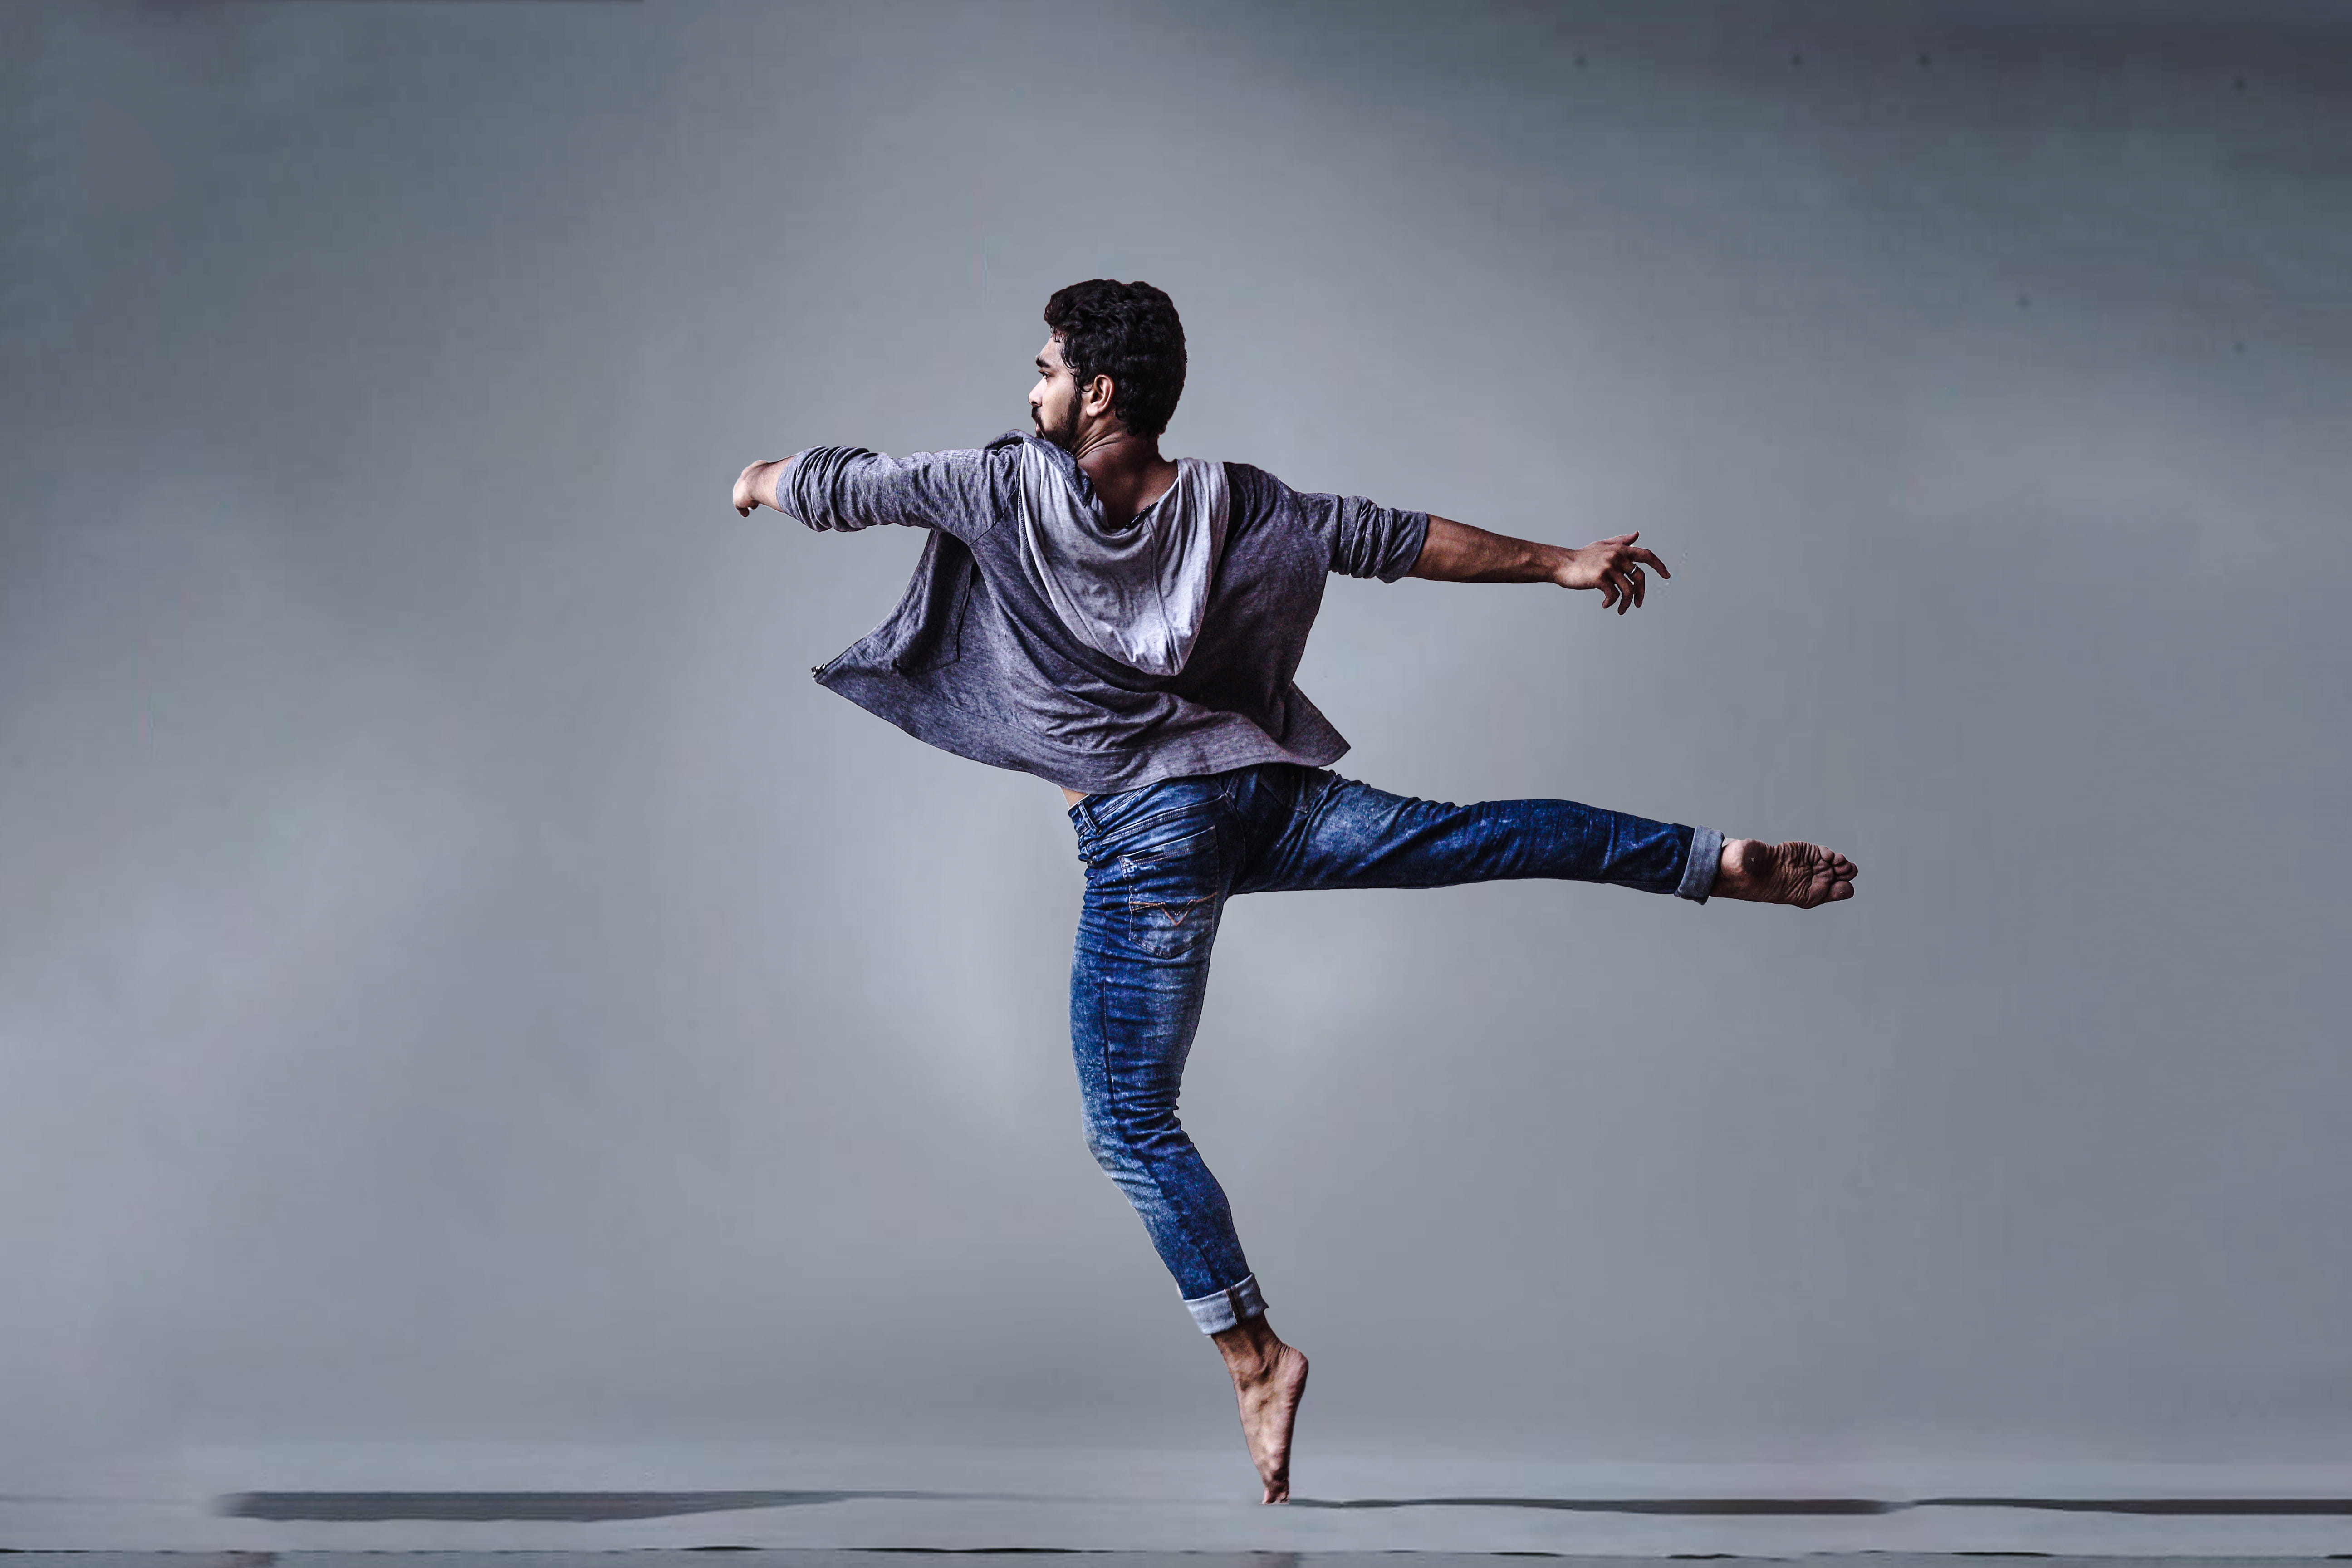 Man Wearing Blue Jeans Doing Pirouette Spin, action, agility